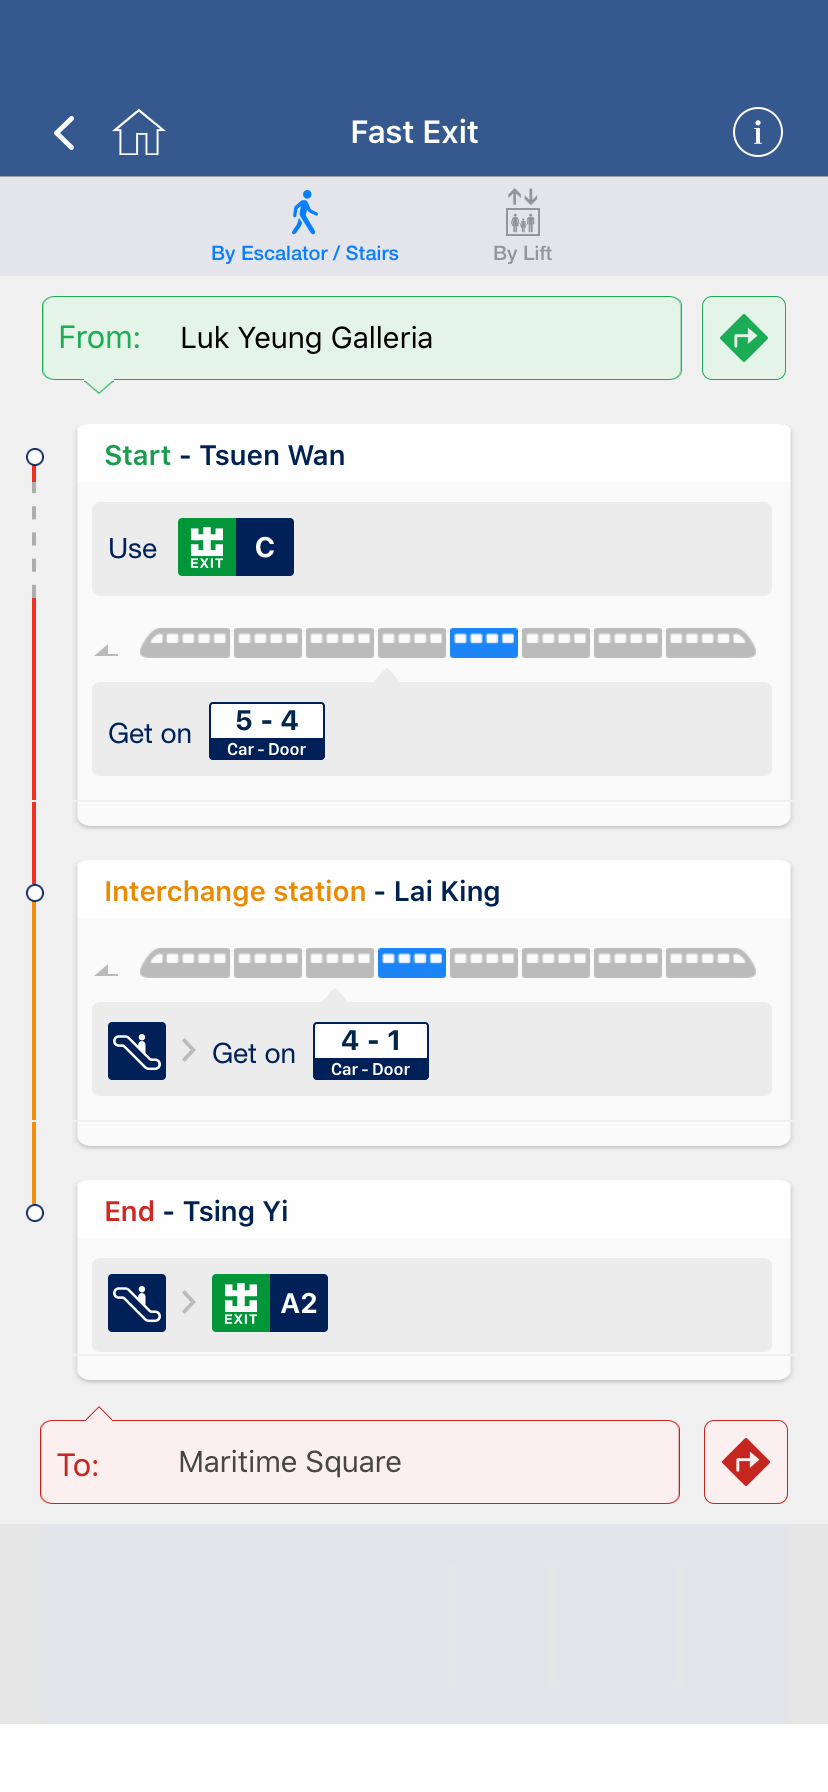 The function shows you the specific train car number and door number for boarding, allowing you to reach your destination more quickly when you get off the train